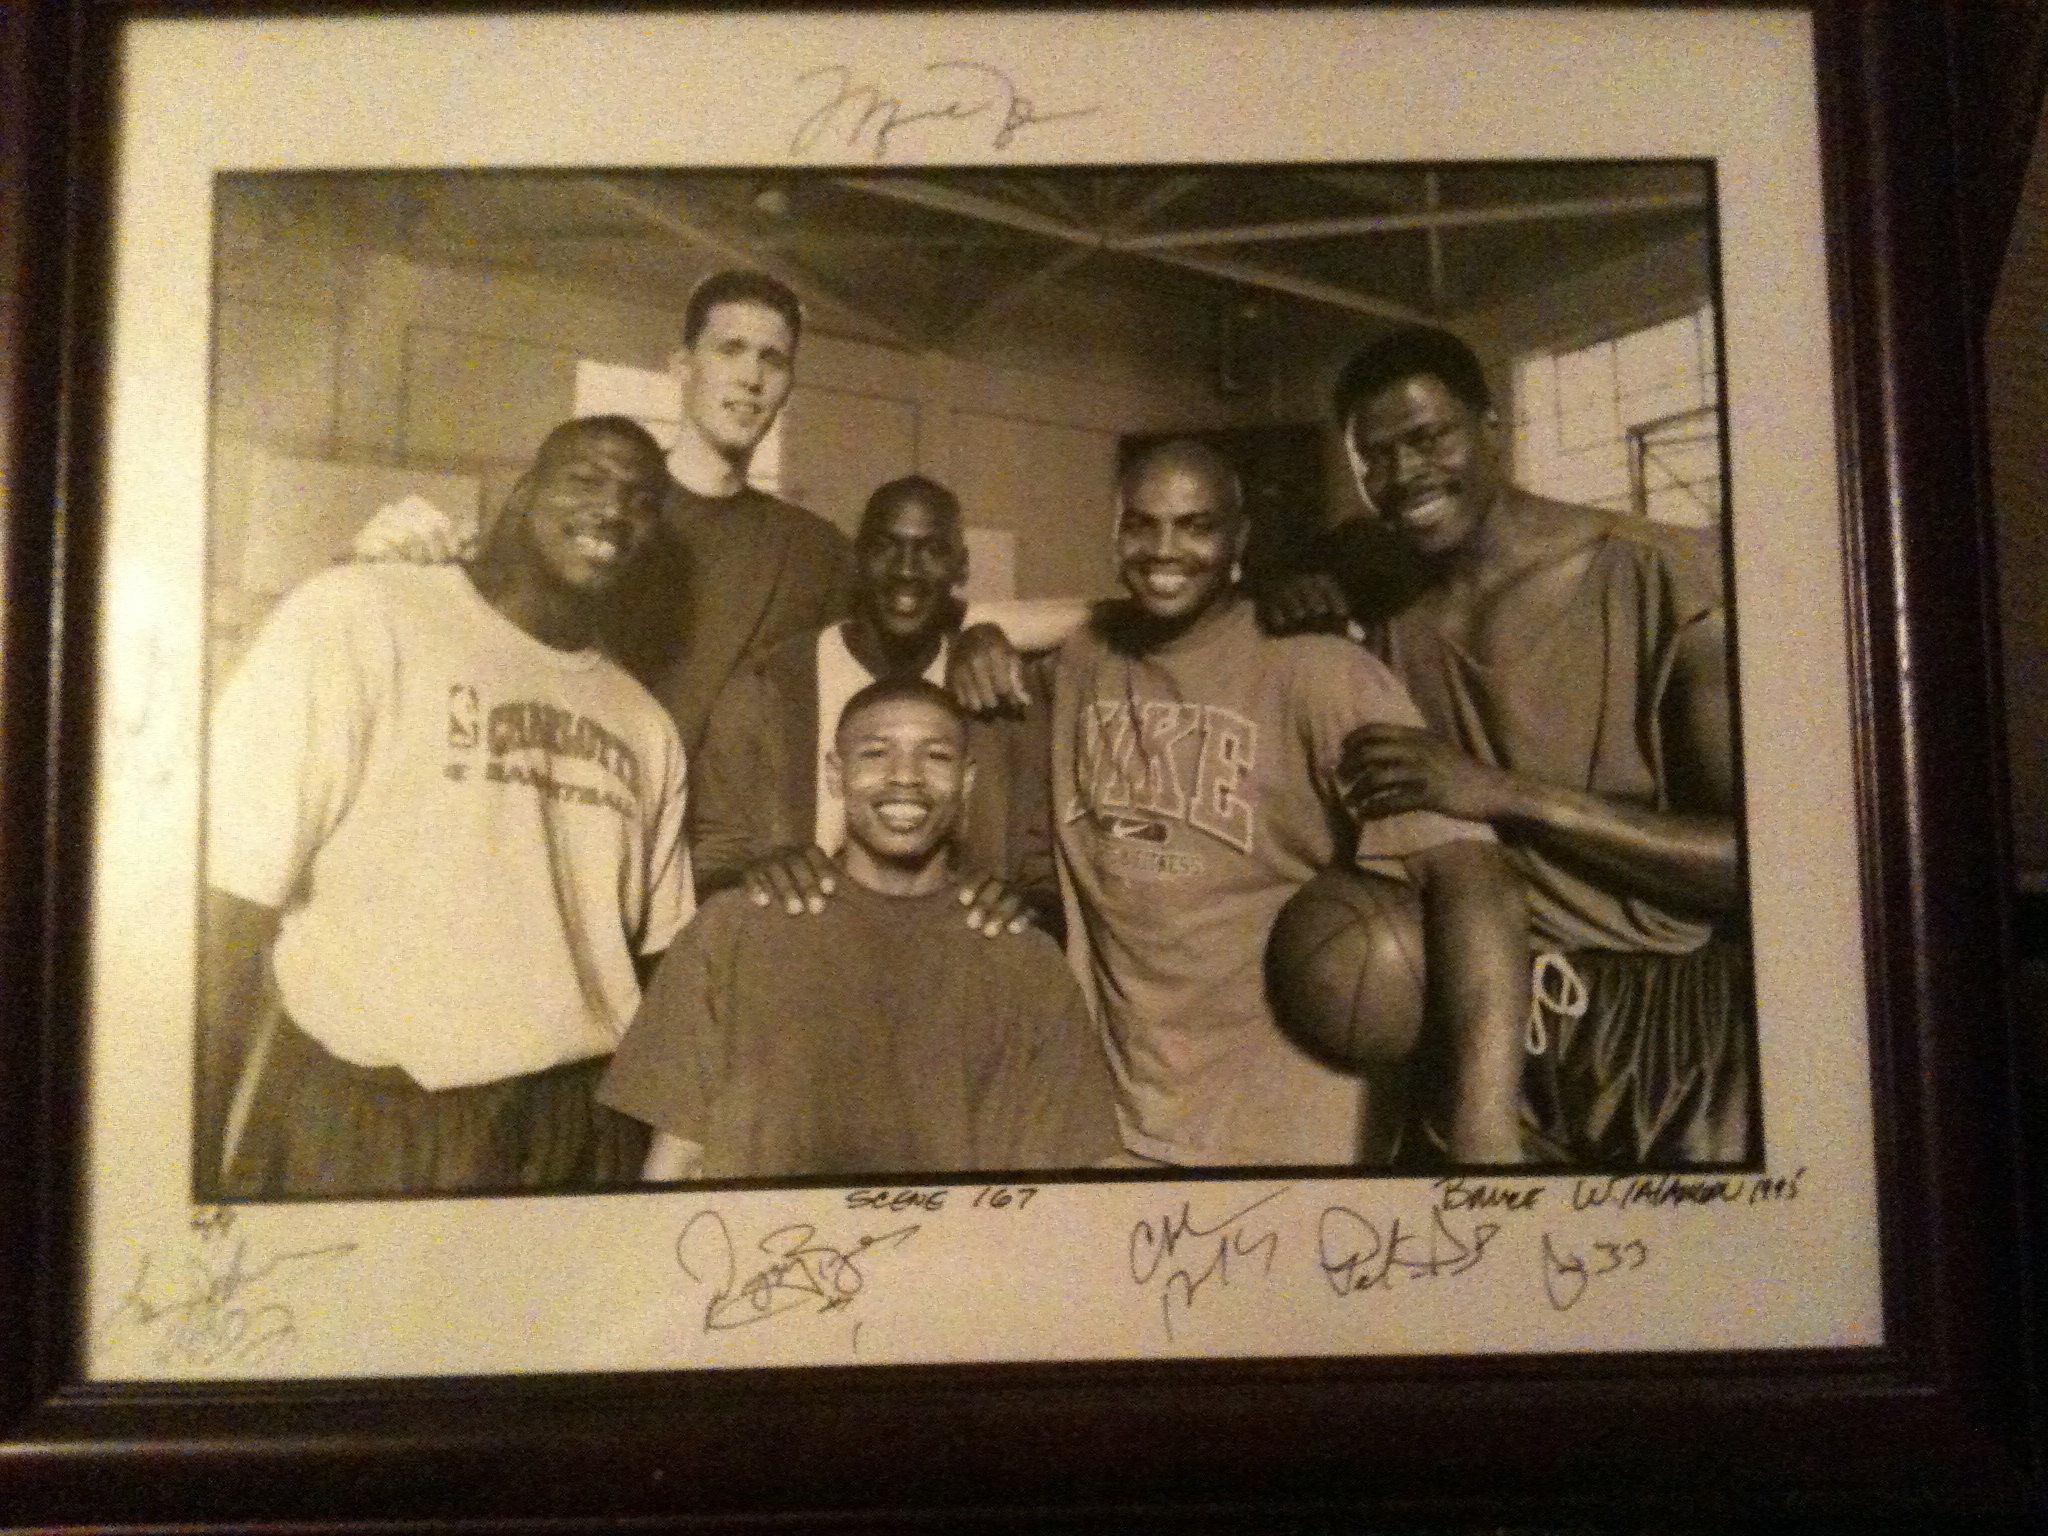 MJ & The Space Jam Crew. This is a limited Edition Photo 1 of 9 everyone in the photo has and MJ & Charles made sure that I got one along with Director Joe Pytka.